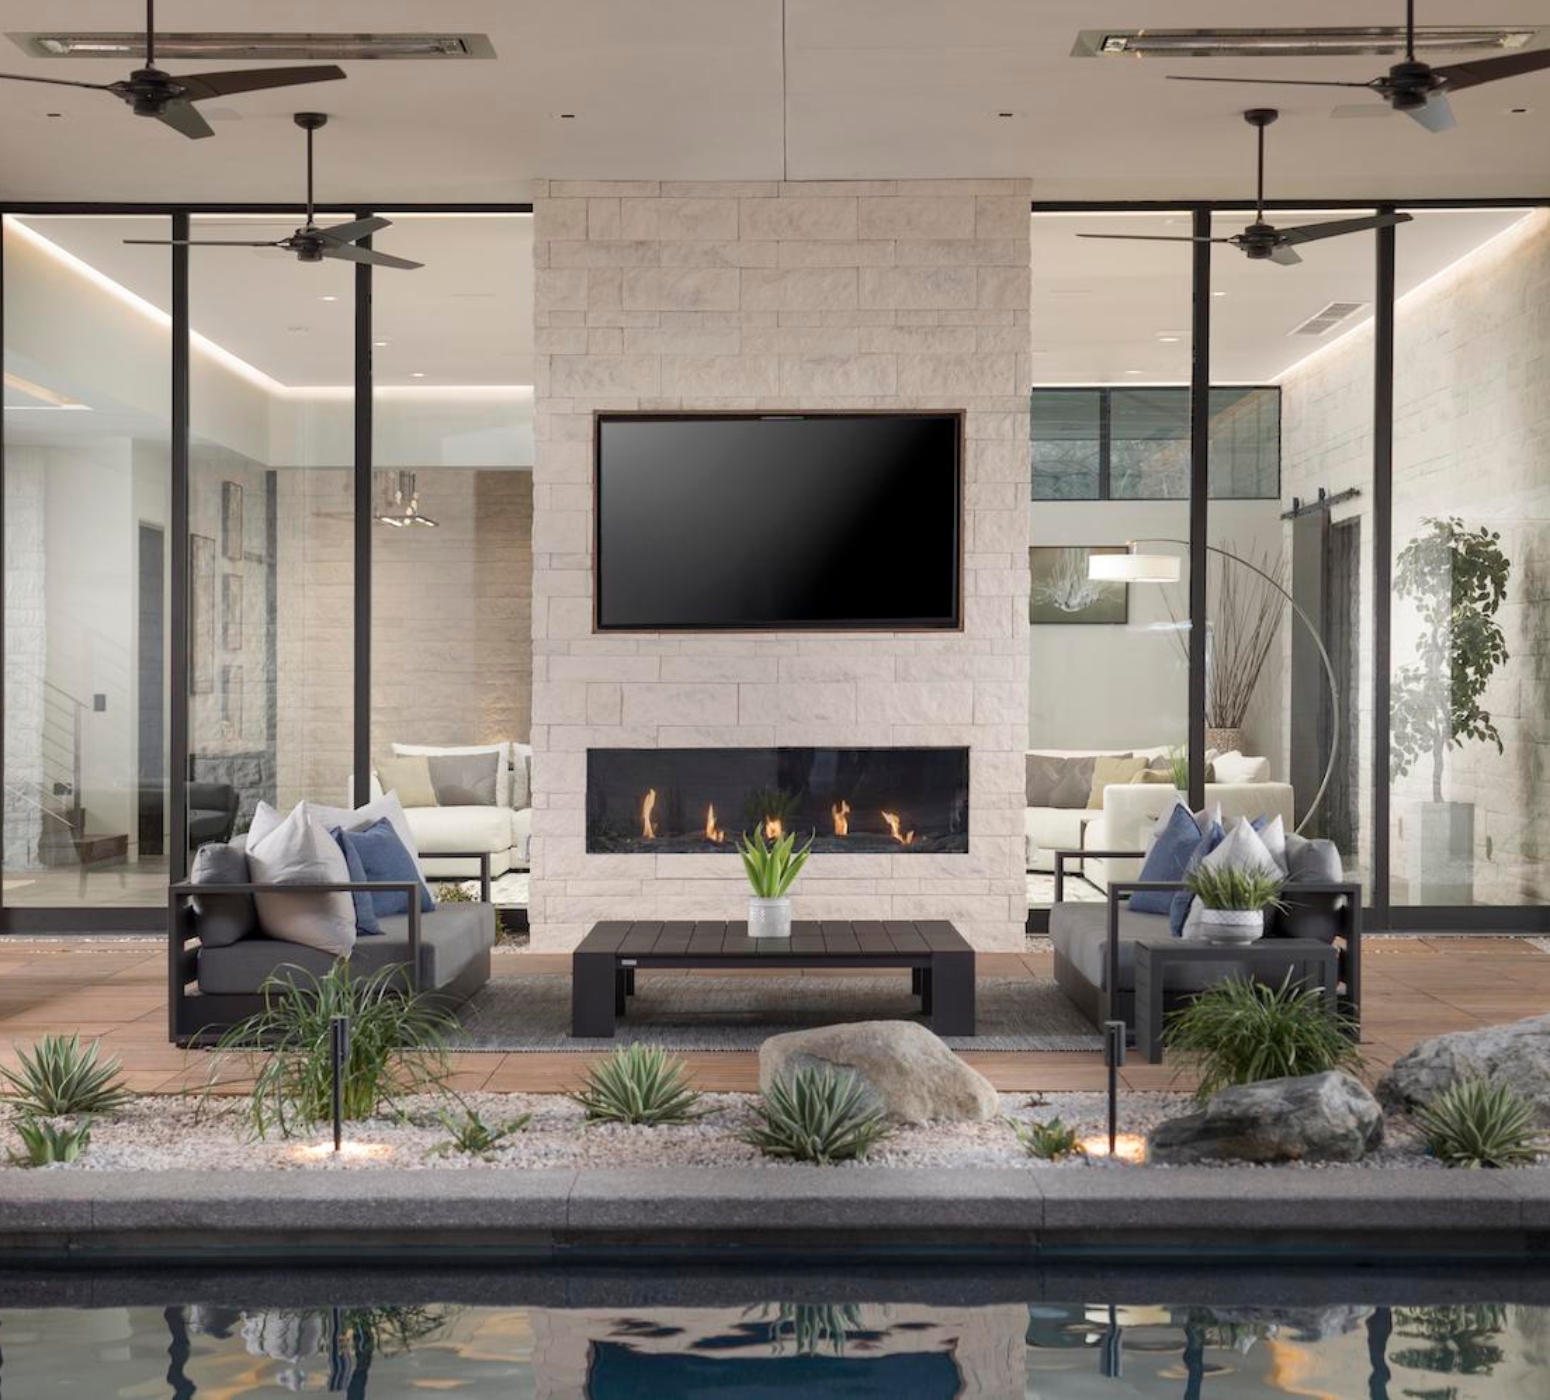 2019 The New American Remodel by the National Association of Home Builders in Las Vegas